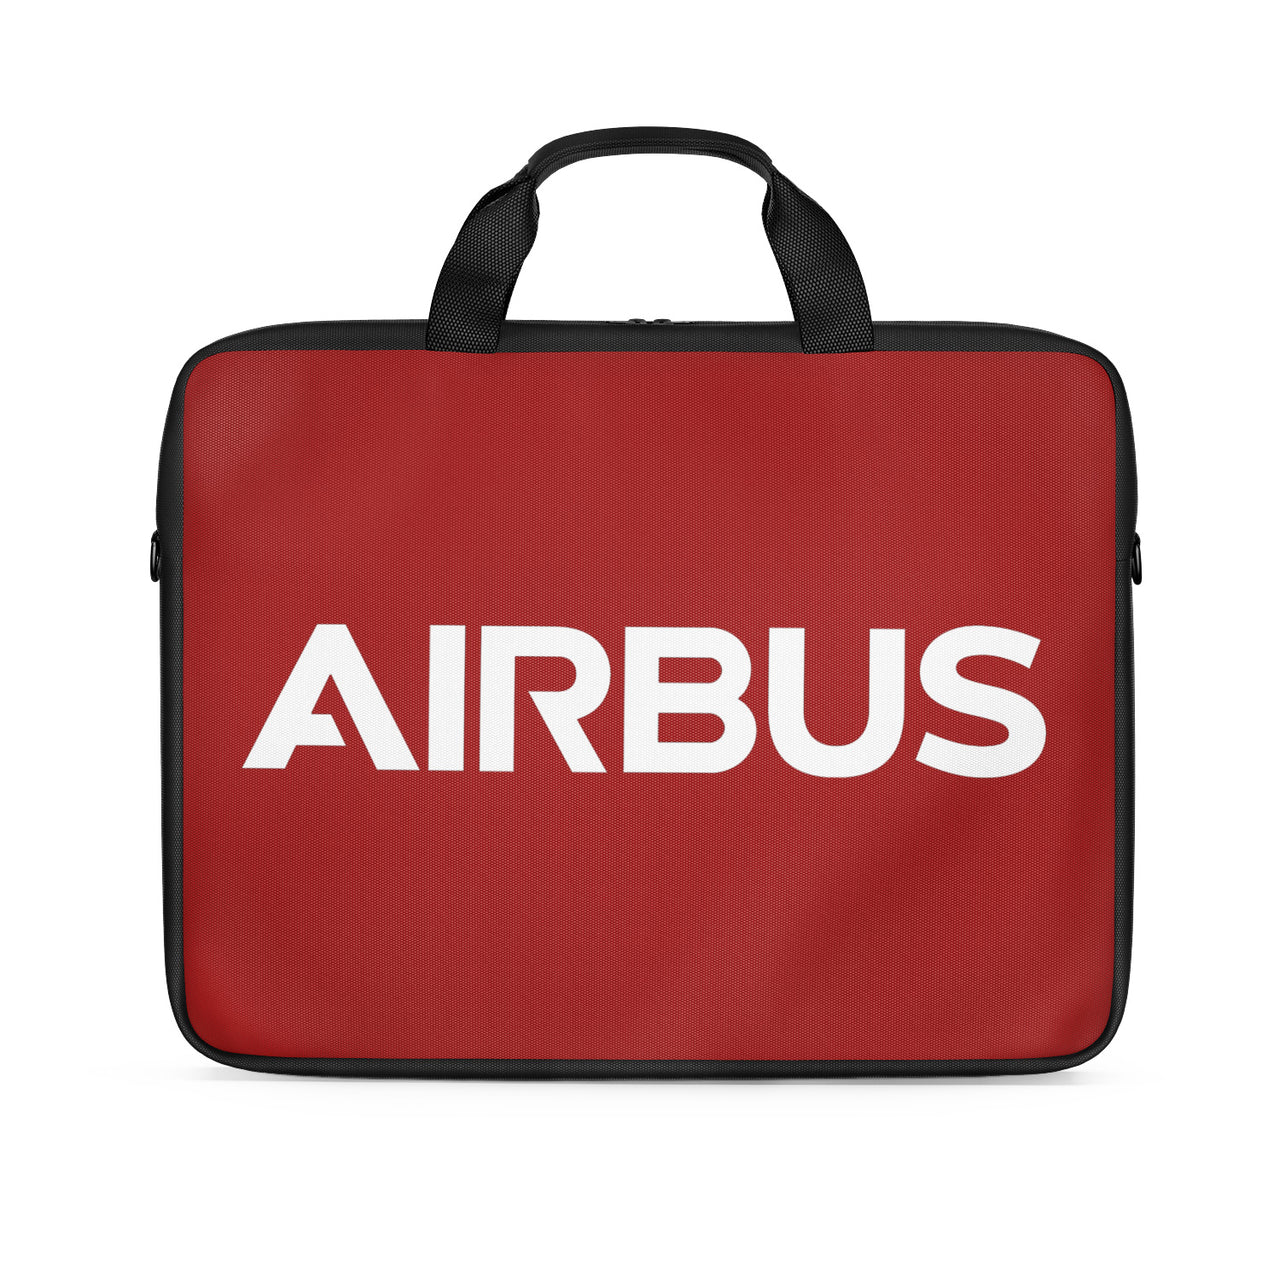 Airbus & Text Designed Laptop & Tablet Bags